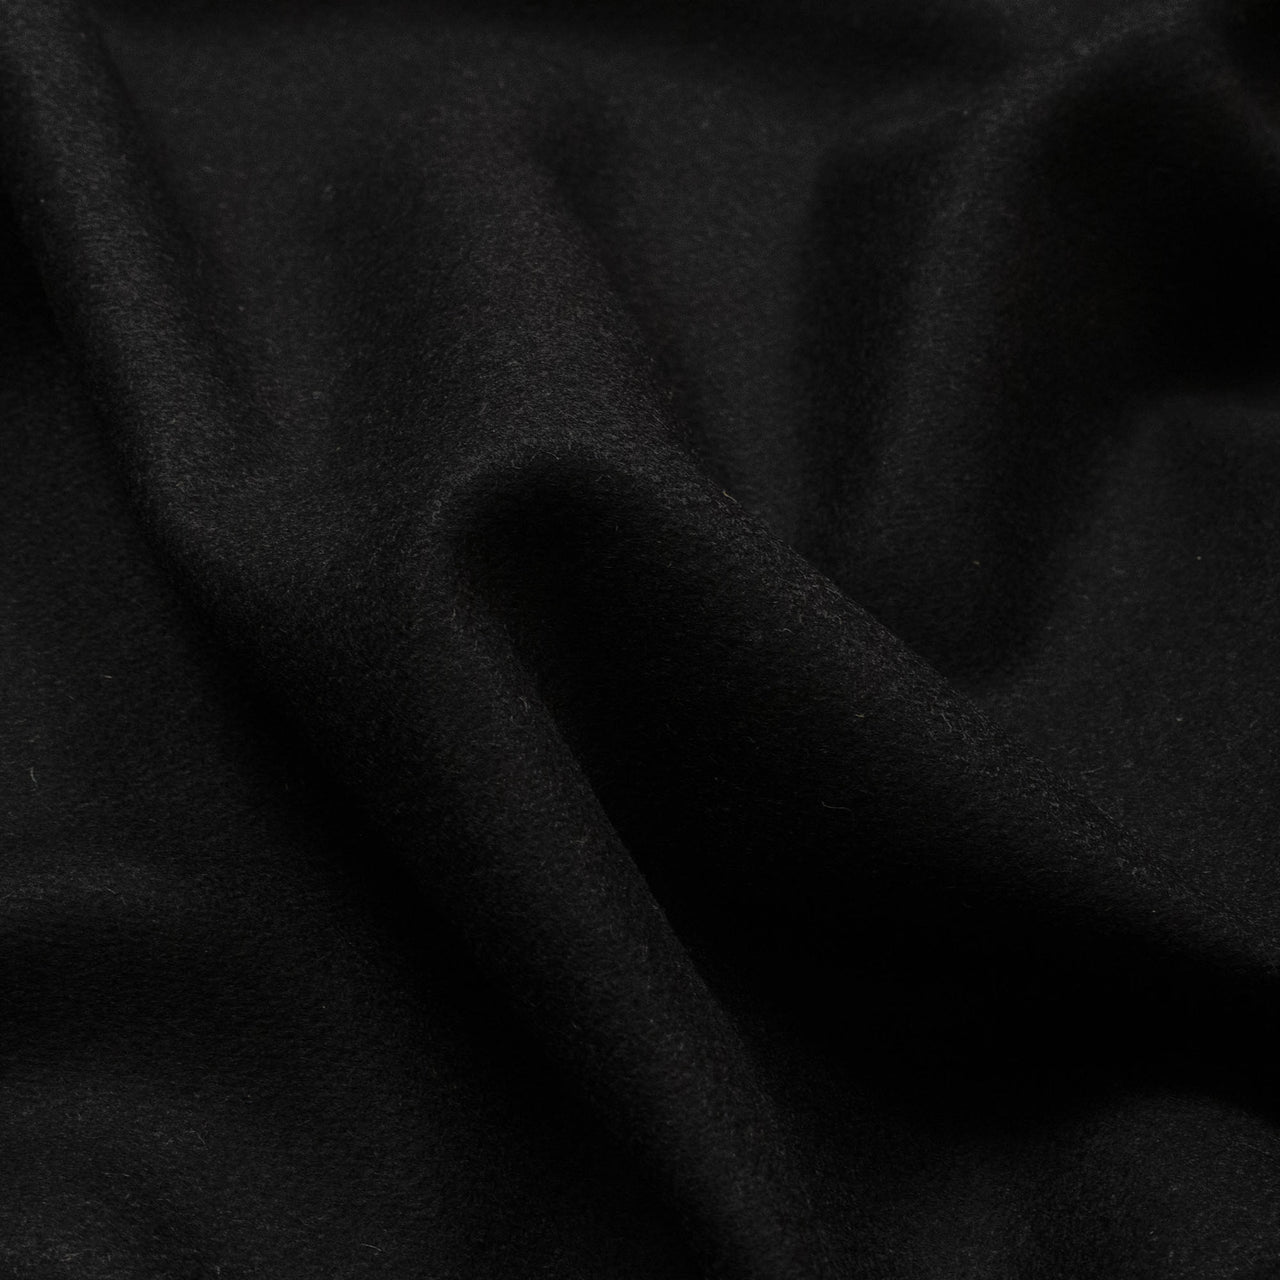 Black - Melton Wool Fabric -  Soft and Warm Fabric for Coats, Clothing and Blankets